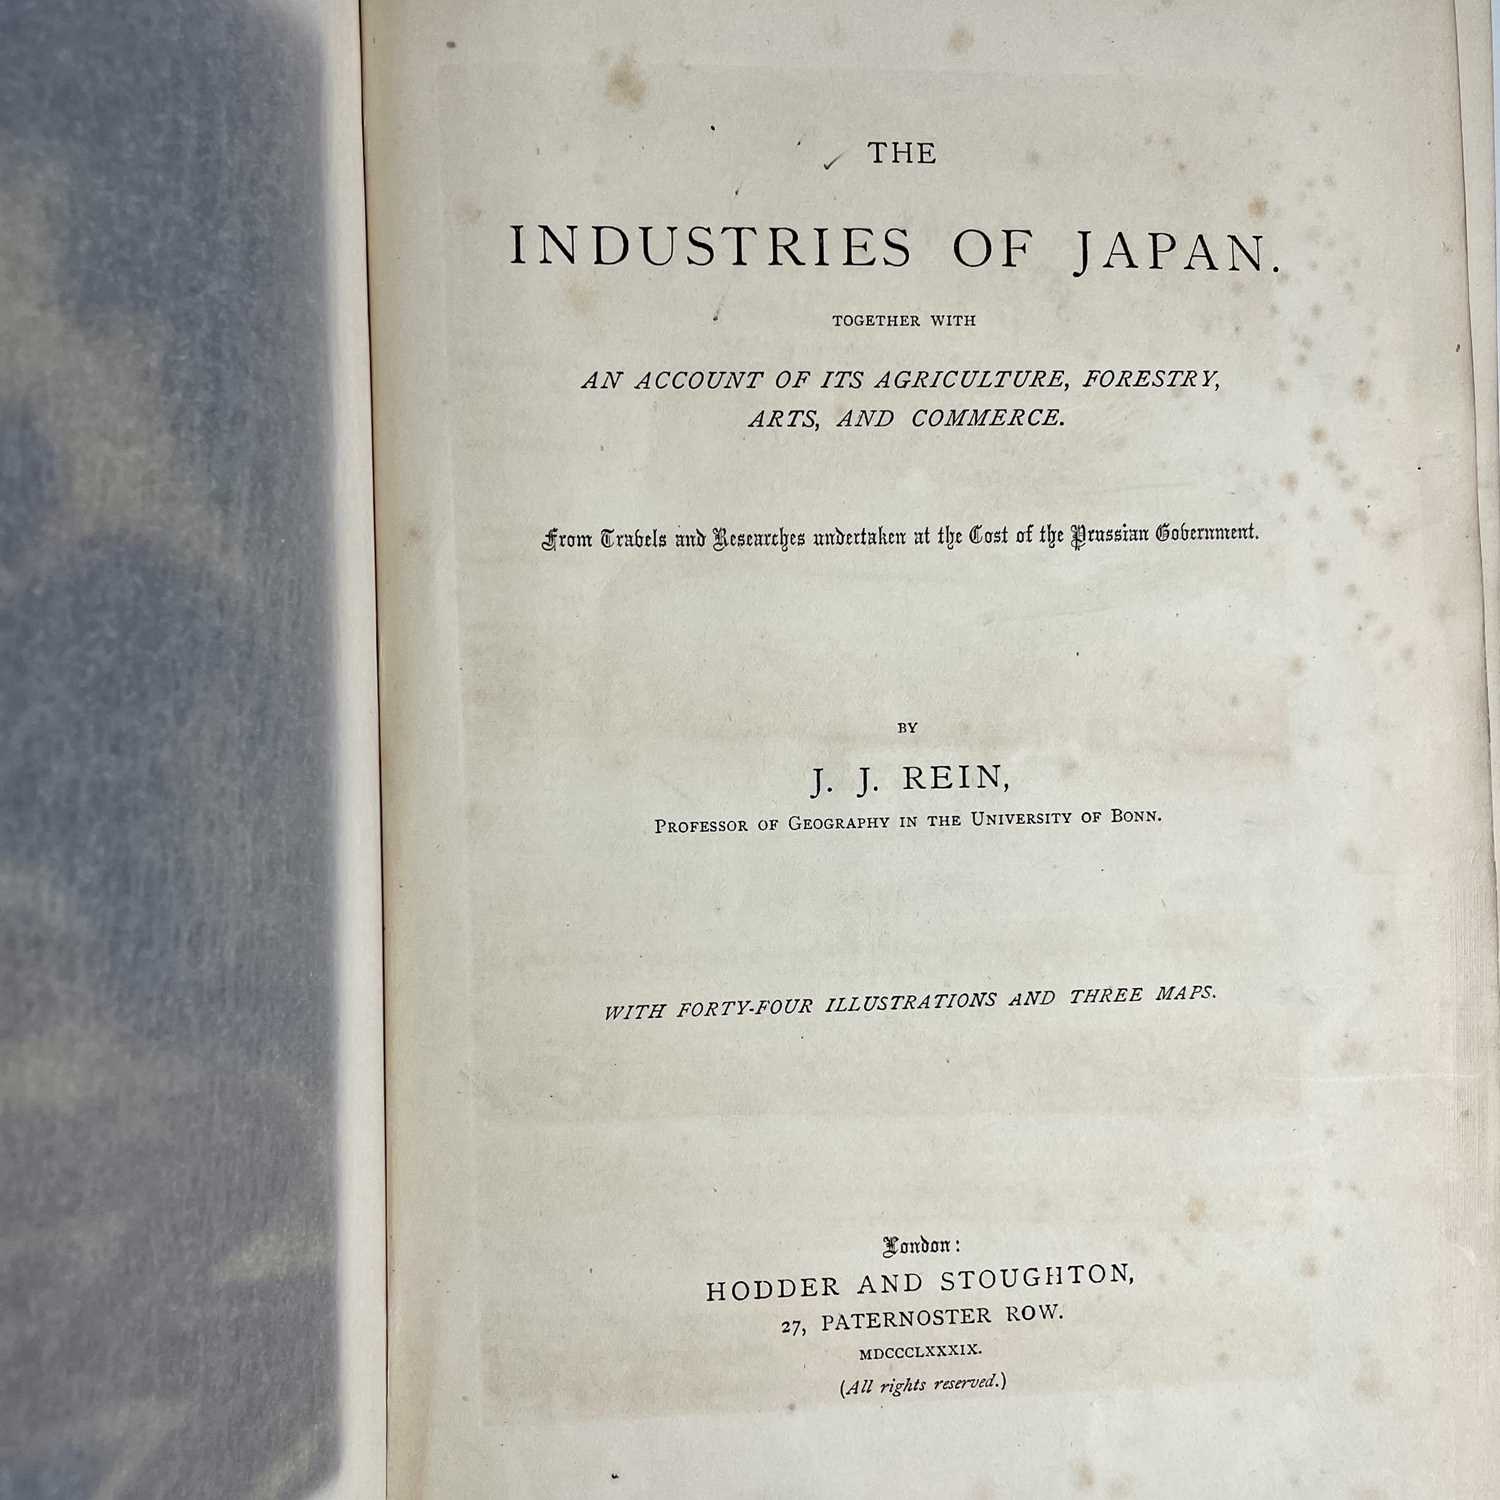 J. J. REIN. 'he Industries of Japan, Together with an Account of its Agriculture, Forestry, Arts, - Image 7 of 7